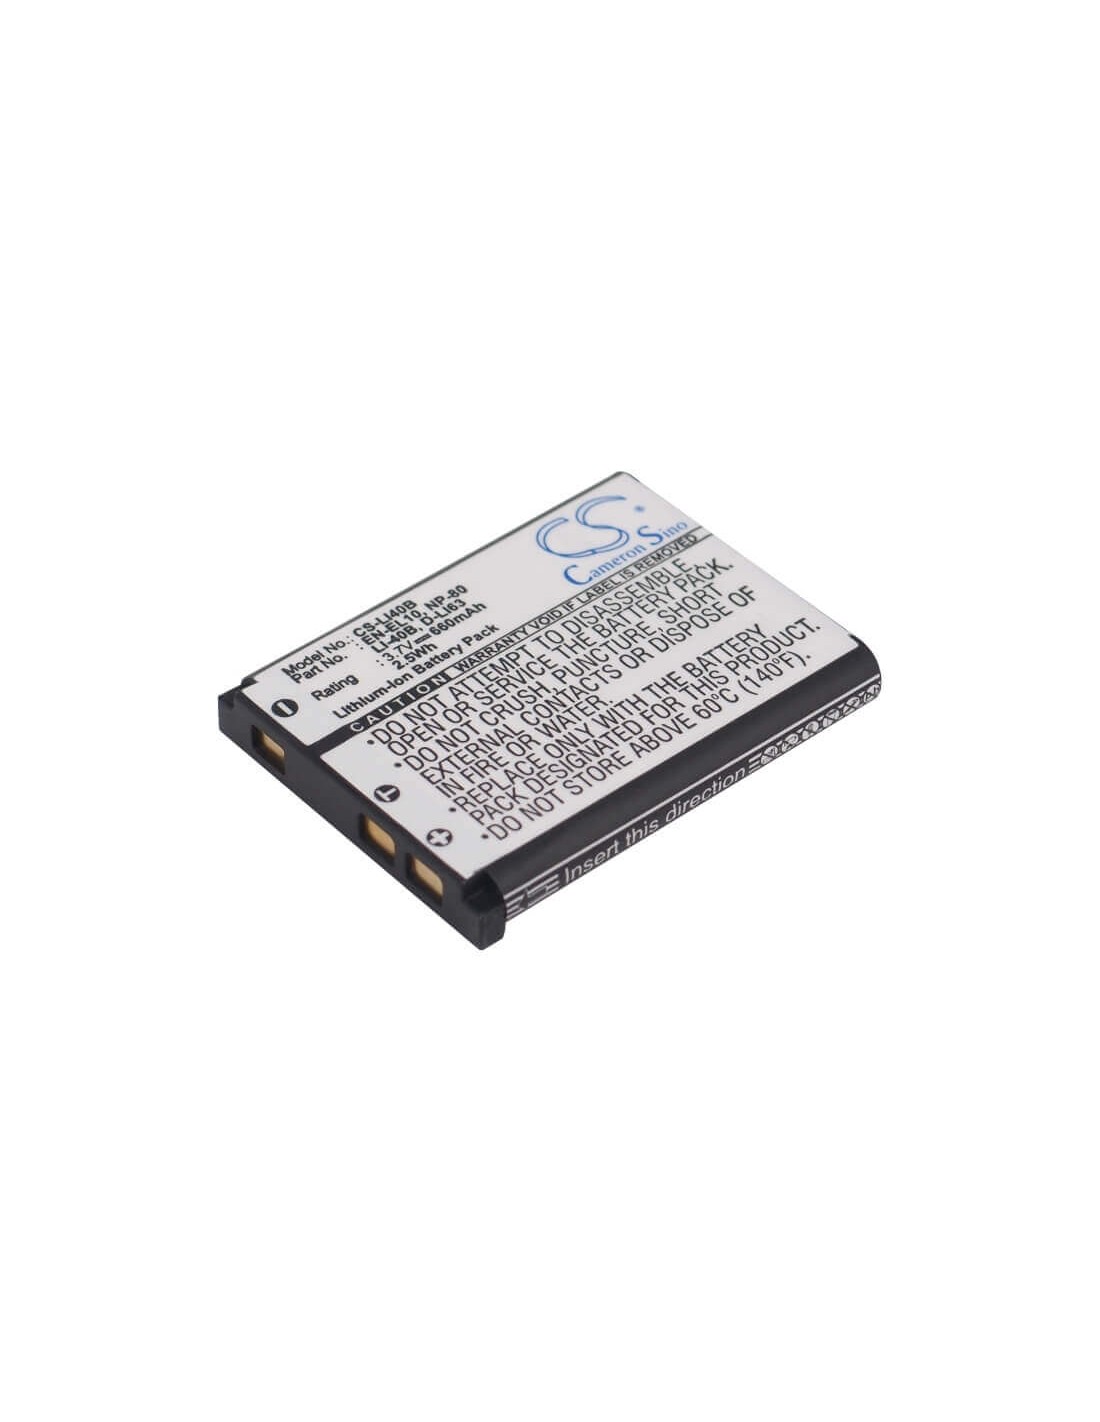 Battery for Olympus Ir-300, Sp-700, Tg-310, Vr-310, 3.7V, 660mAh - 2.44Wh